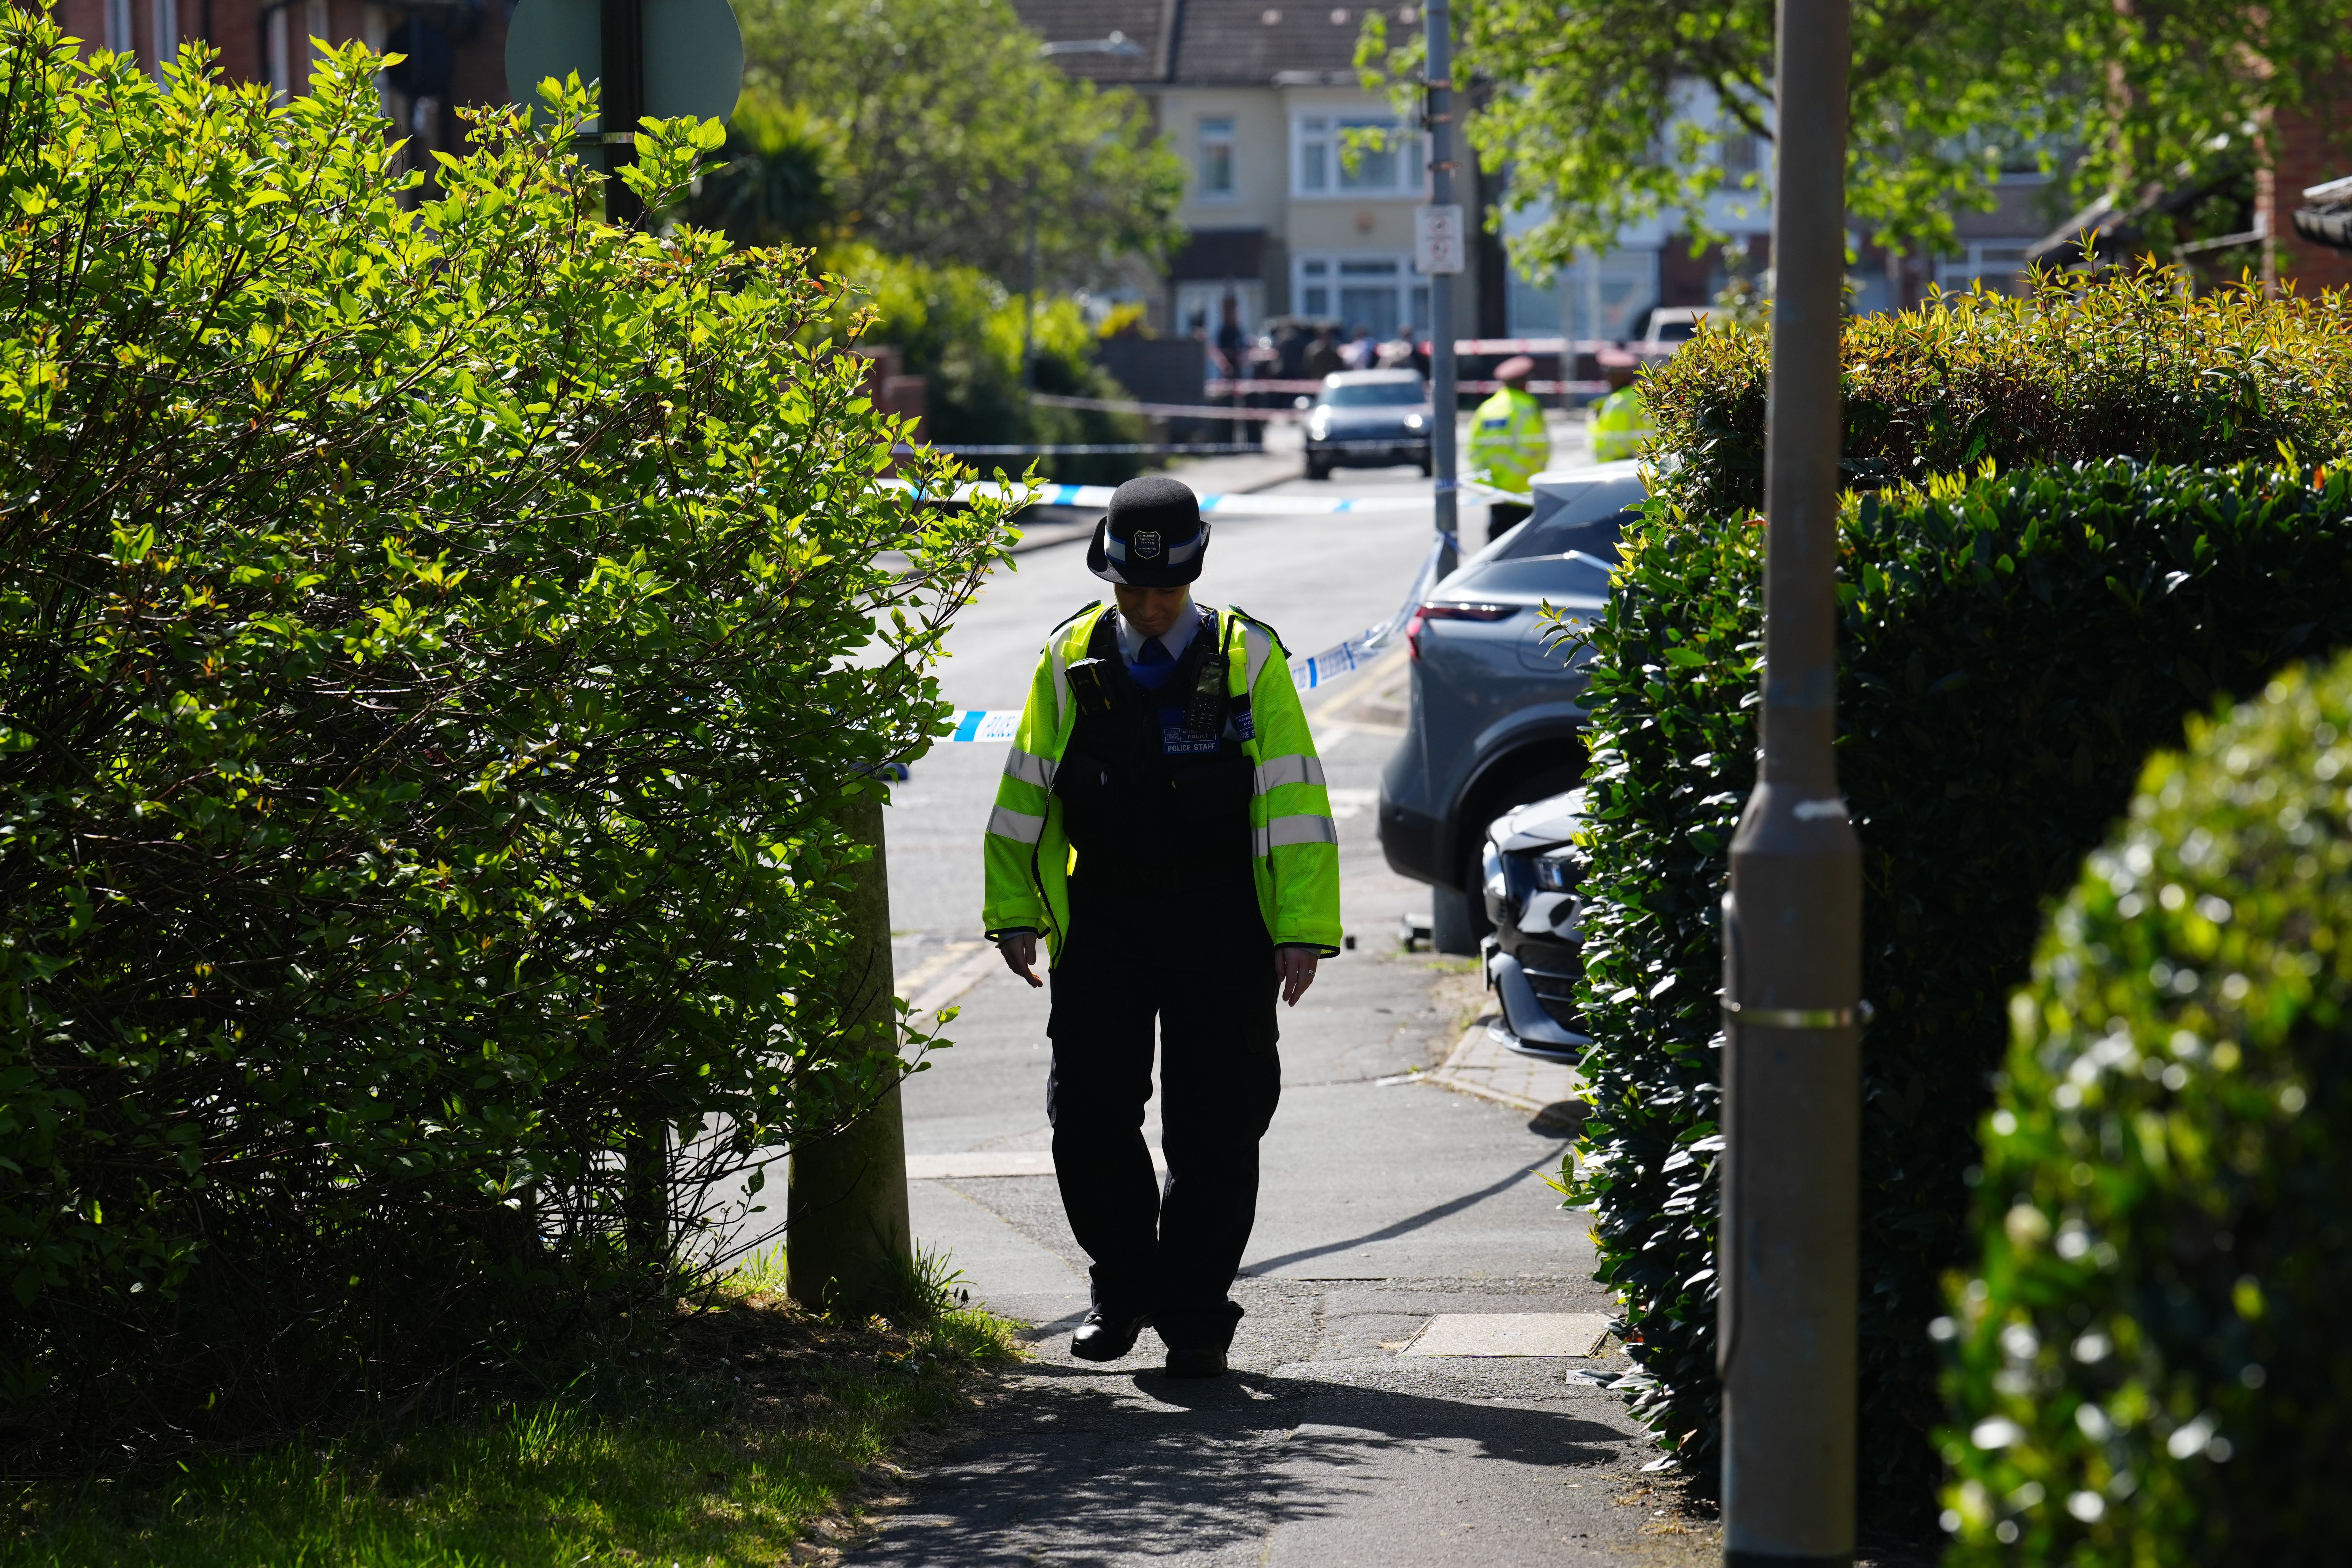 A police officer secures the scene after the sword attack